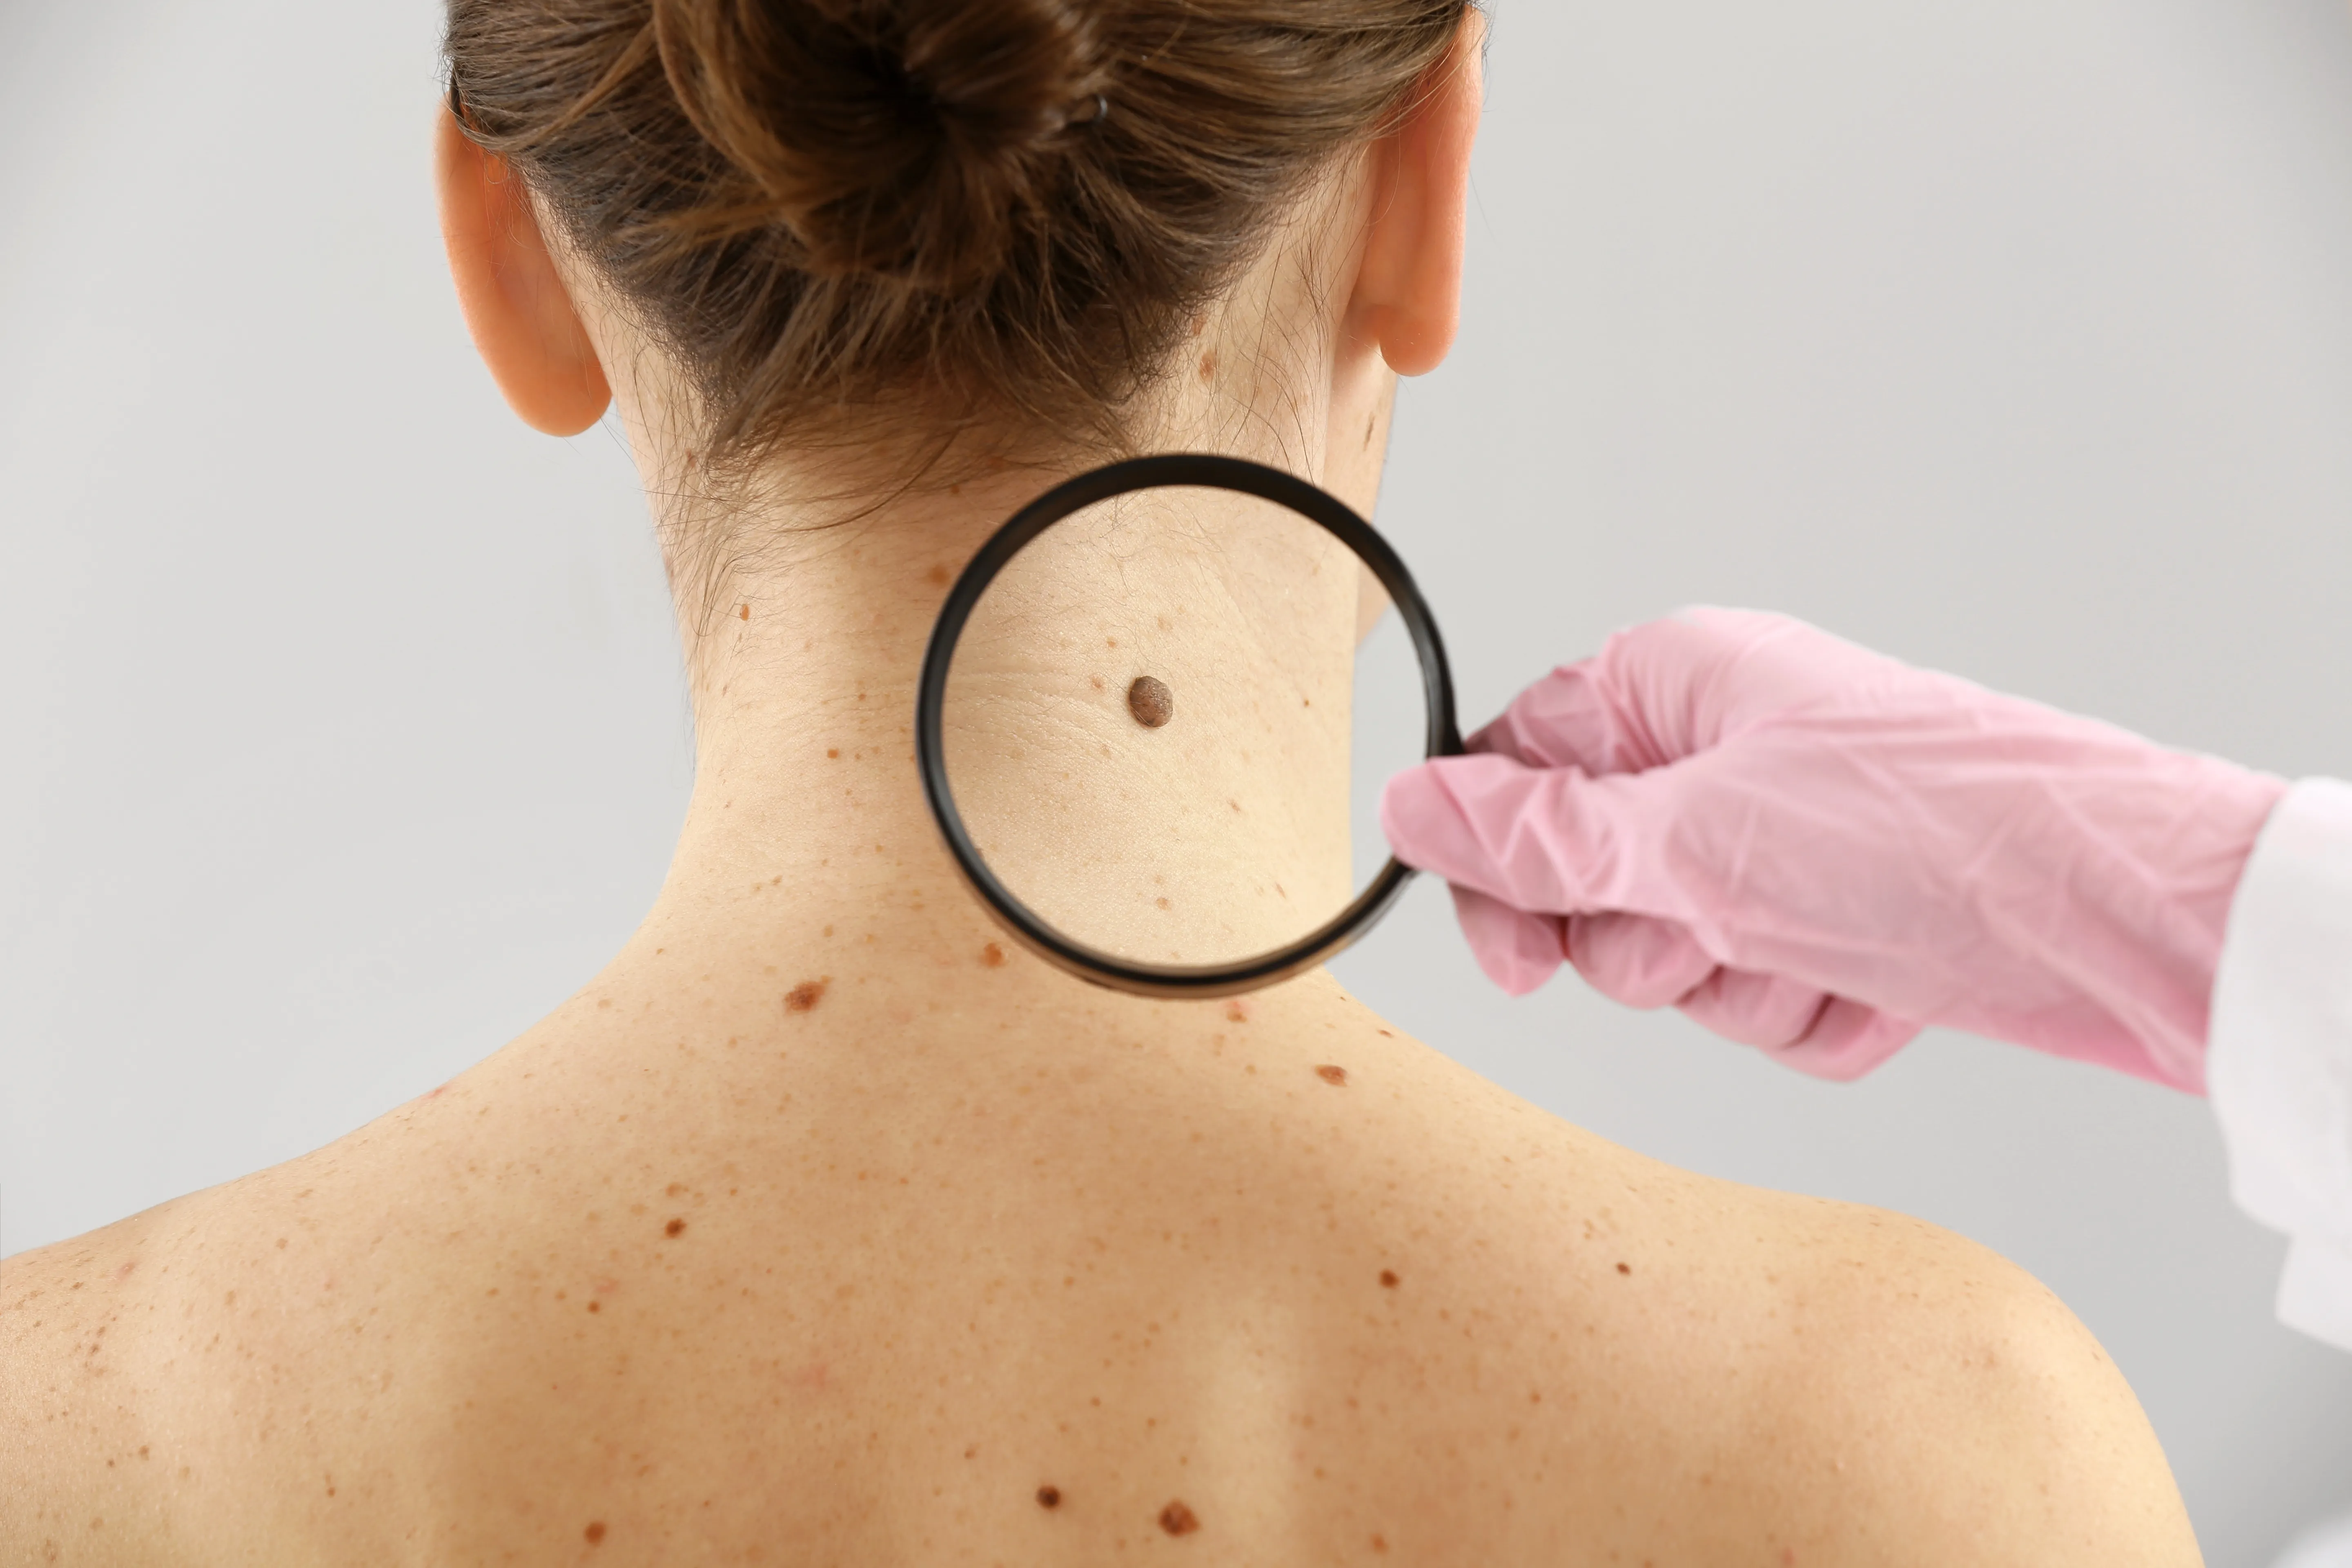 The Hidden Symptoms of Skin Cancer: 6 Signs You Shouldn’t Ignore